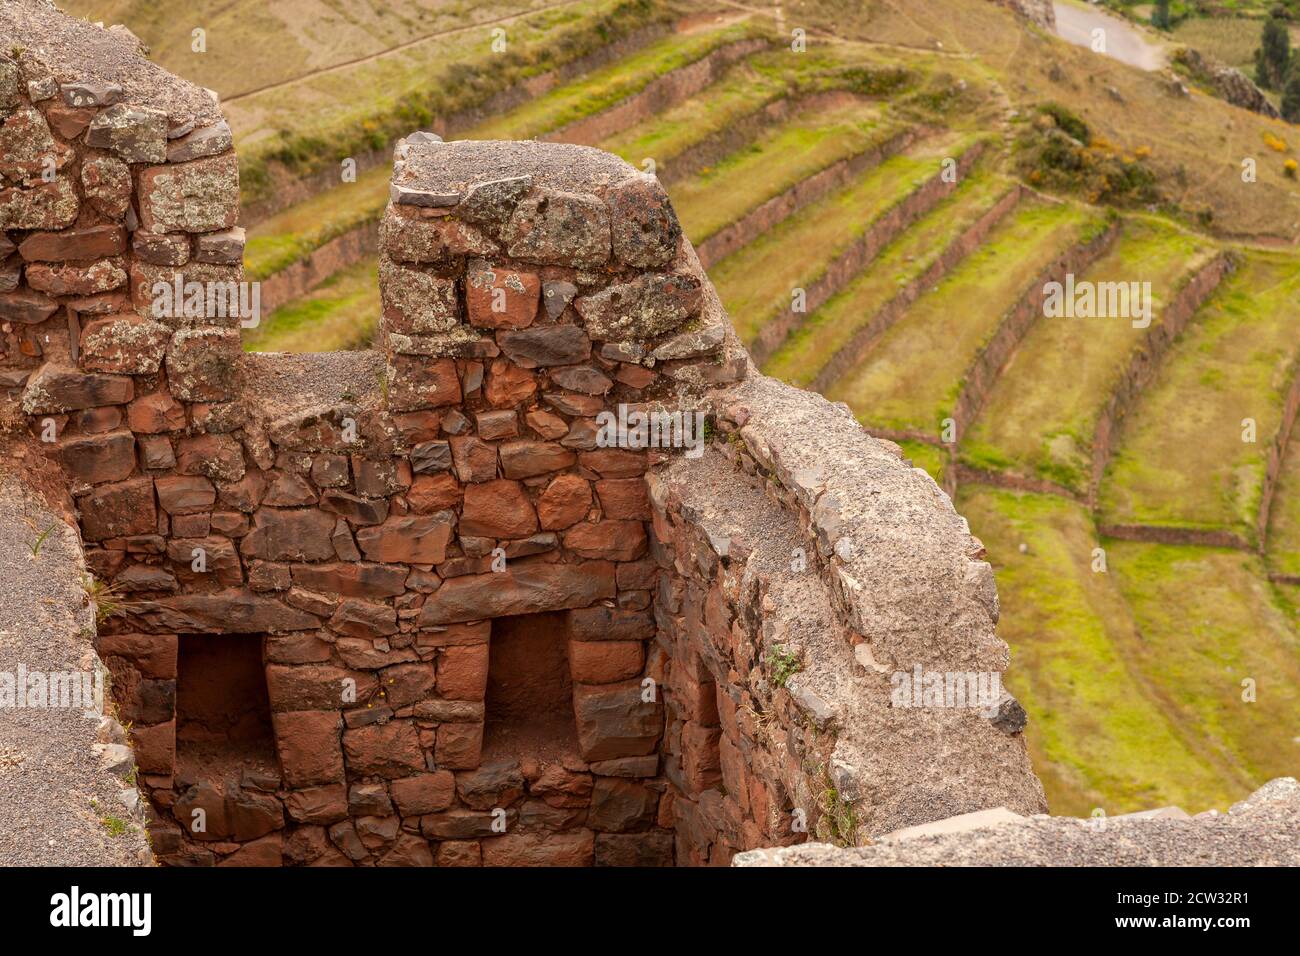 Pisac, Peru - April 4, 2014: Archaeological Park of Pisac, ruins and constructions of the ancient Inca city, near the Vilcanota river valley, Peru. Stock Photo